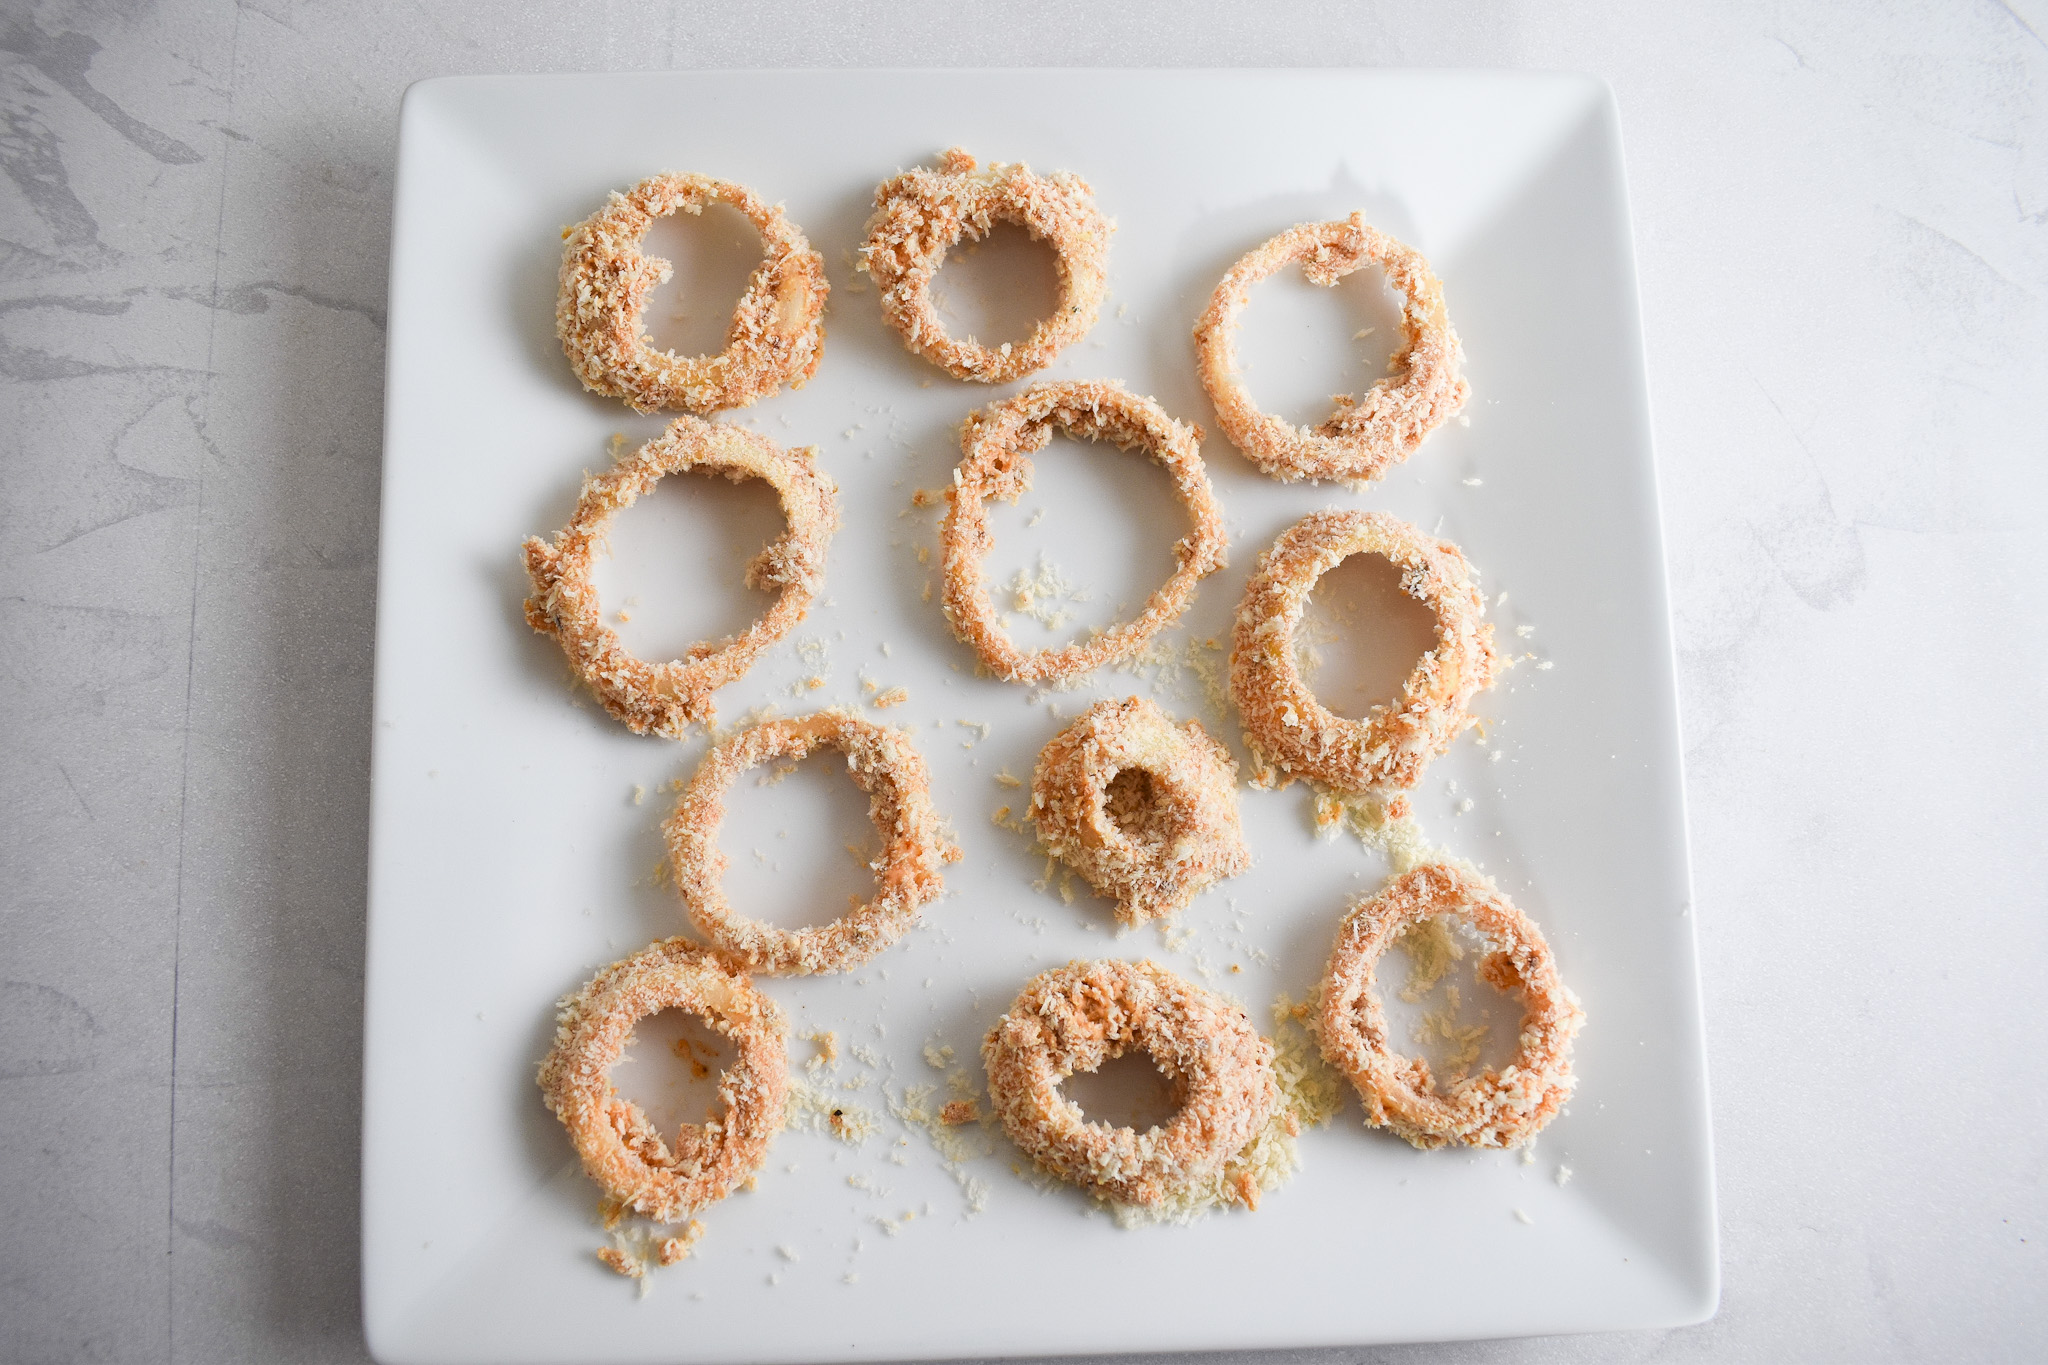 Breaded uncooked onion rings on plate.